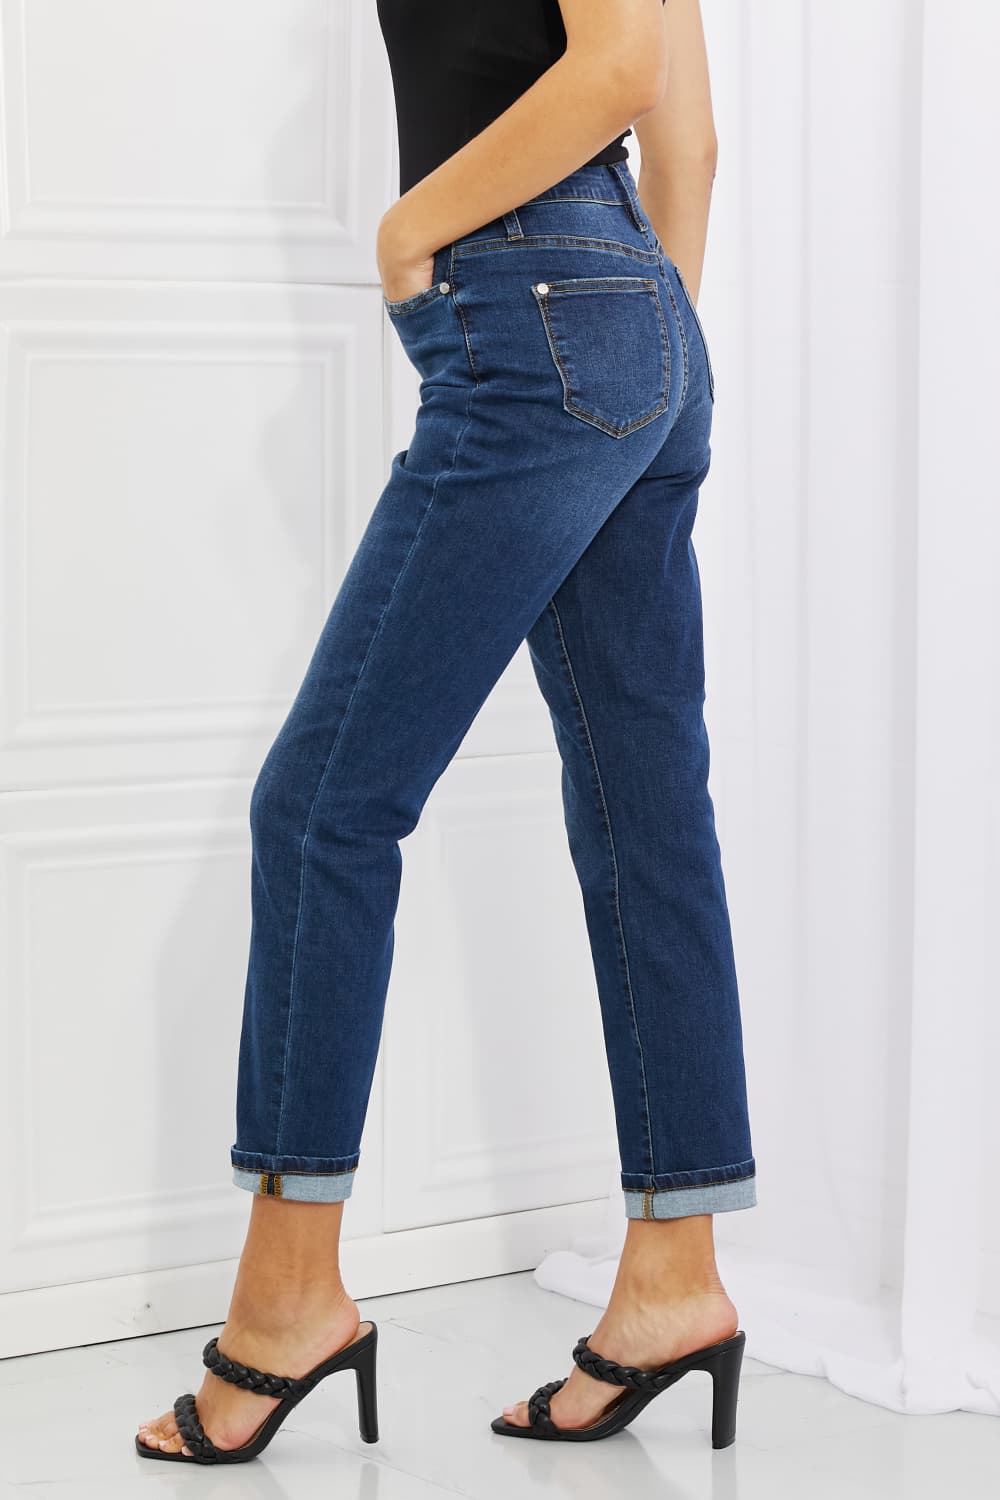 Side View, Judy Blue, High-Rise Sustainable Cool Denim Cuffed Boyfriend Jeans Style 88608